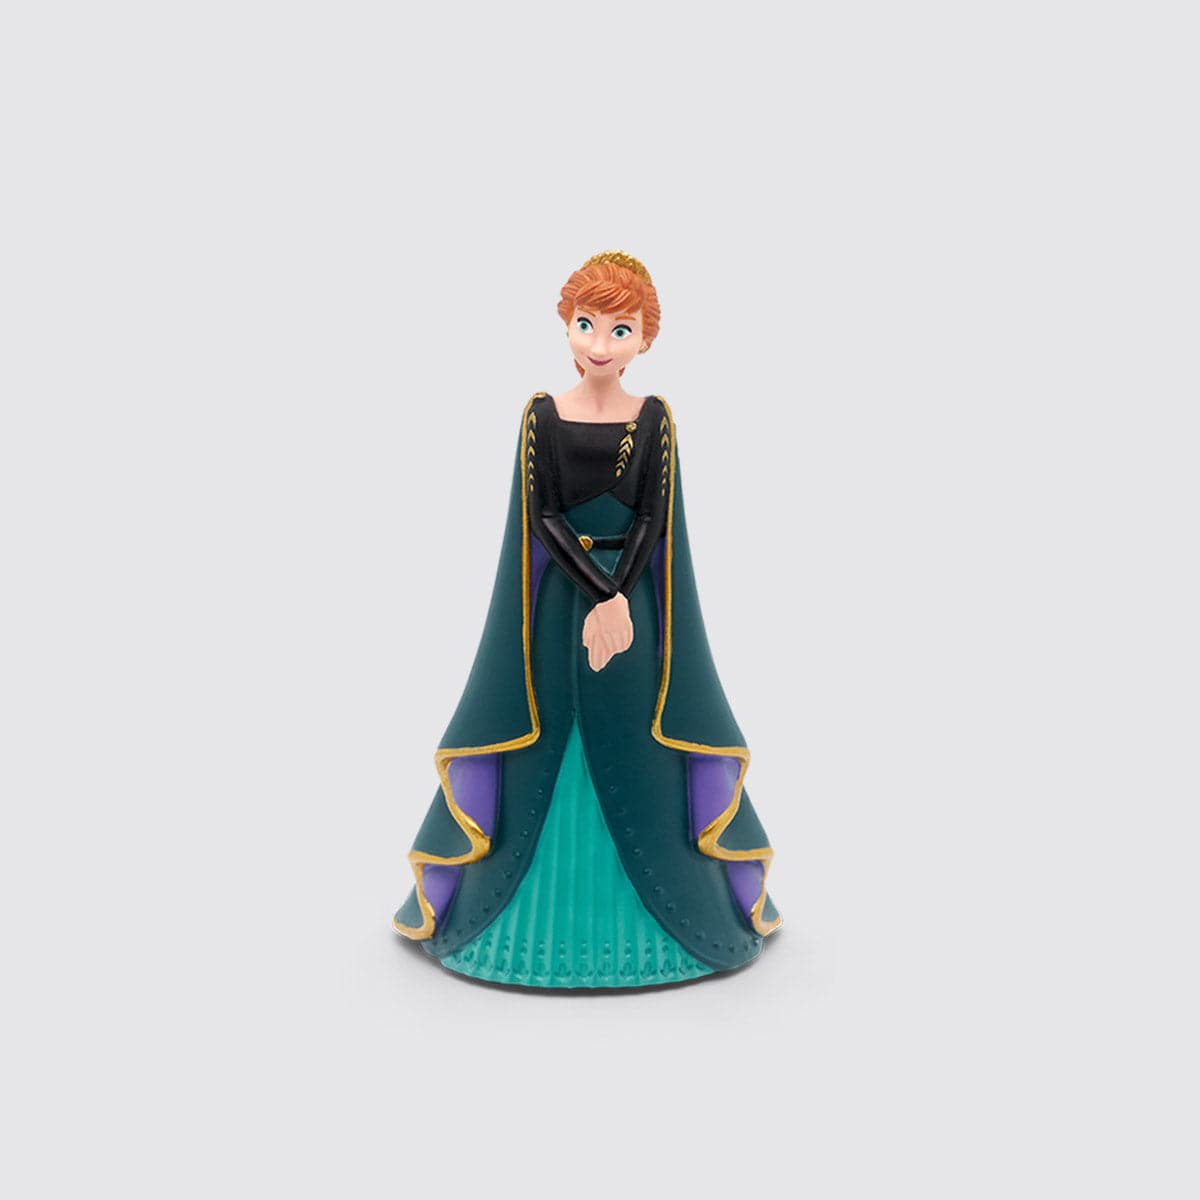 images of anna from frozen 2